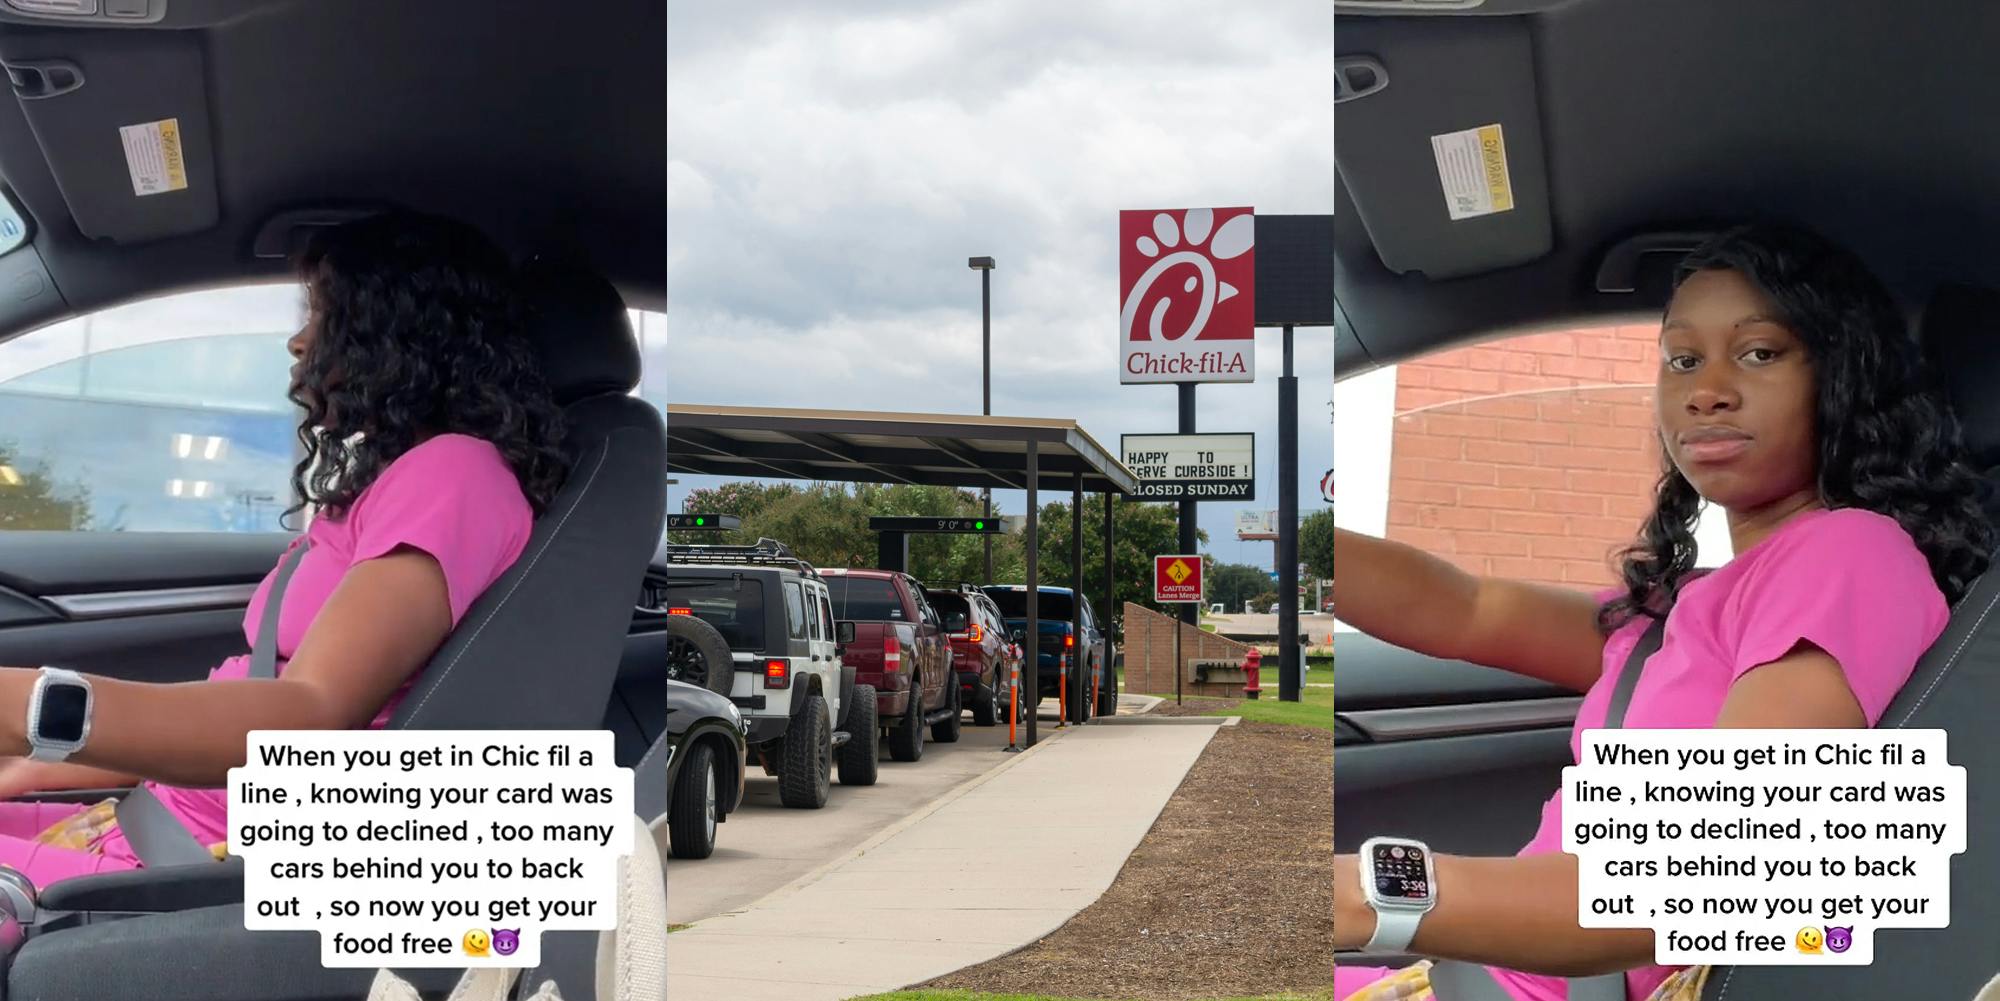 woman driving in car caption "When you get in Chic fil a line, knowing your card was going to get declined, too many cars behind you to back out, so now you get your food free" (l) Chick-fil-A drive thru with sign (c) woman driving in car caption "When you get in Chic fil a line, knowing your card was going to get declined, too many cars behind you to back out, so now you get your food free" (r)